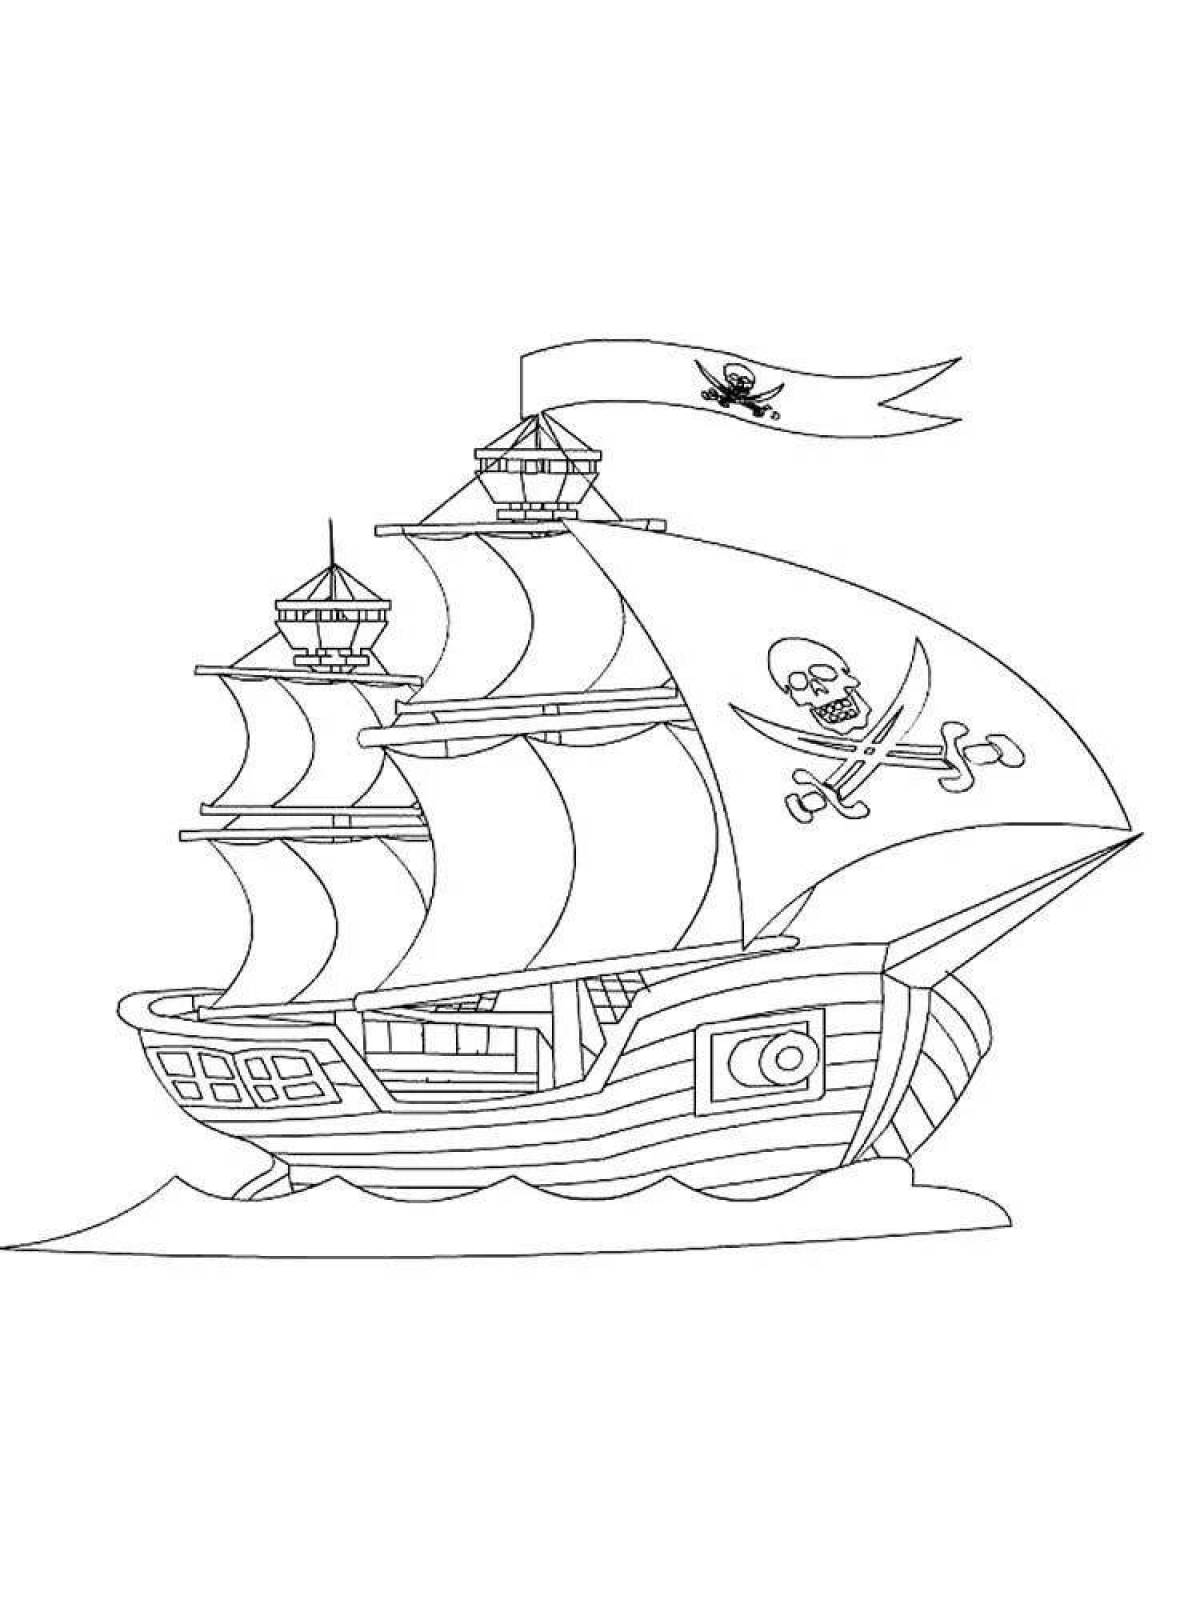 Coloring book big ship for children 5-6 years old